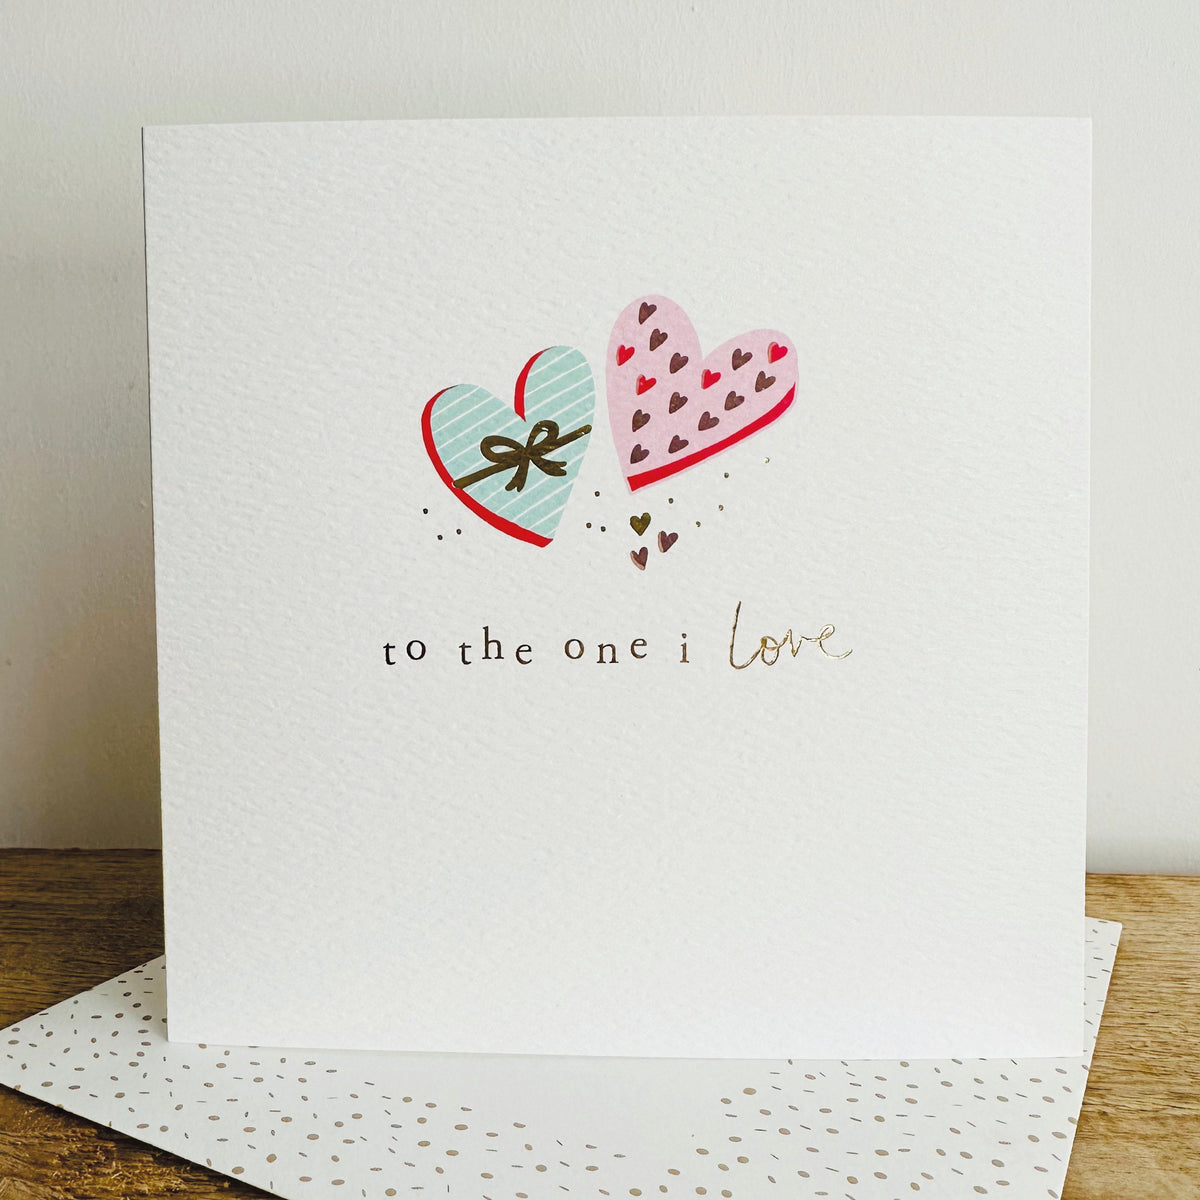 Claire's Cards - Handmade Bespoke Personalised Cards